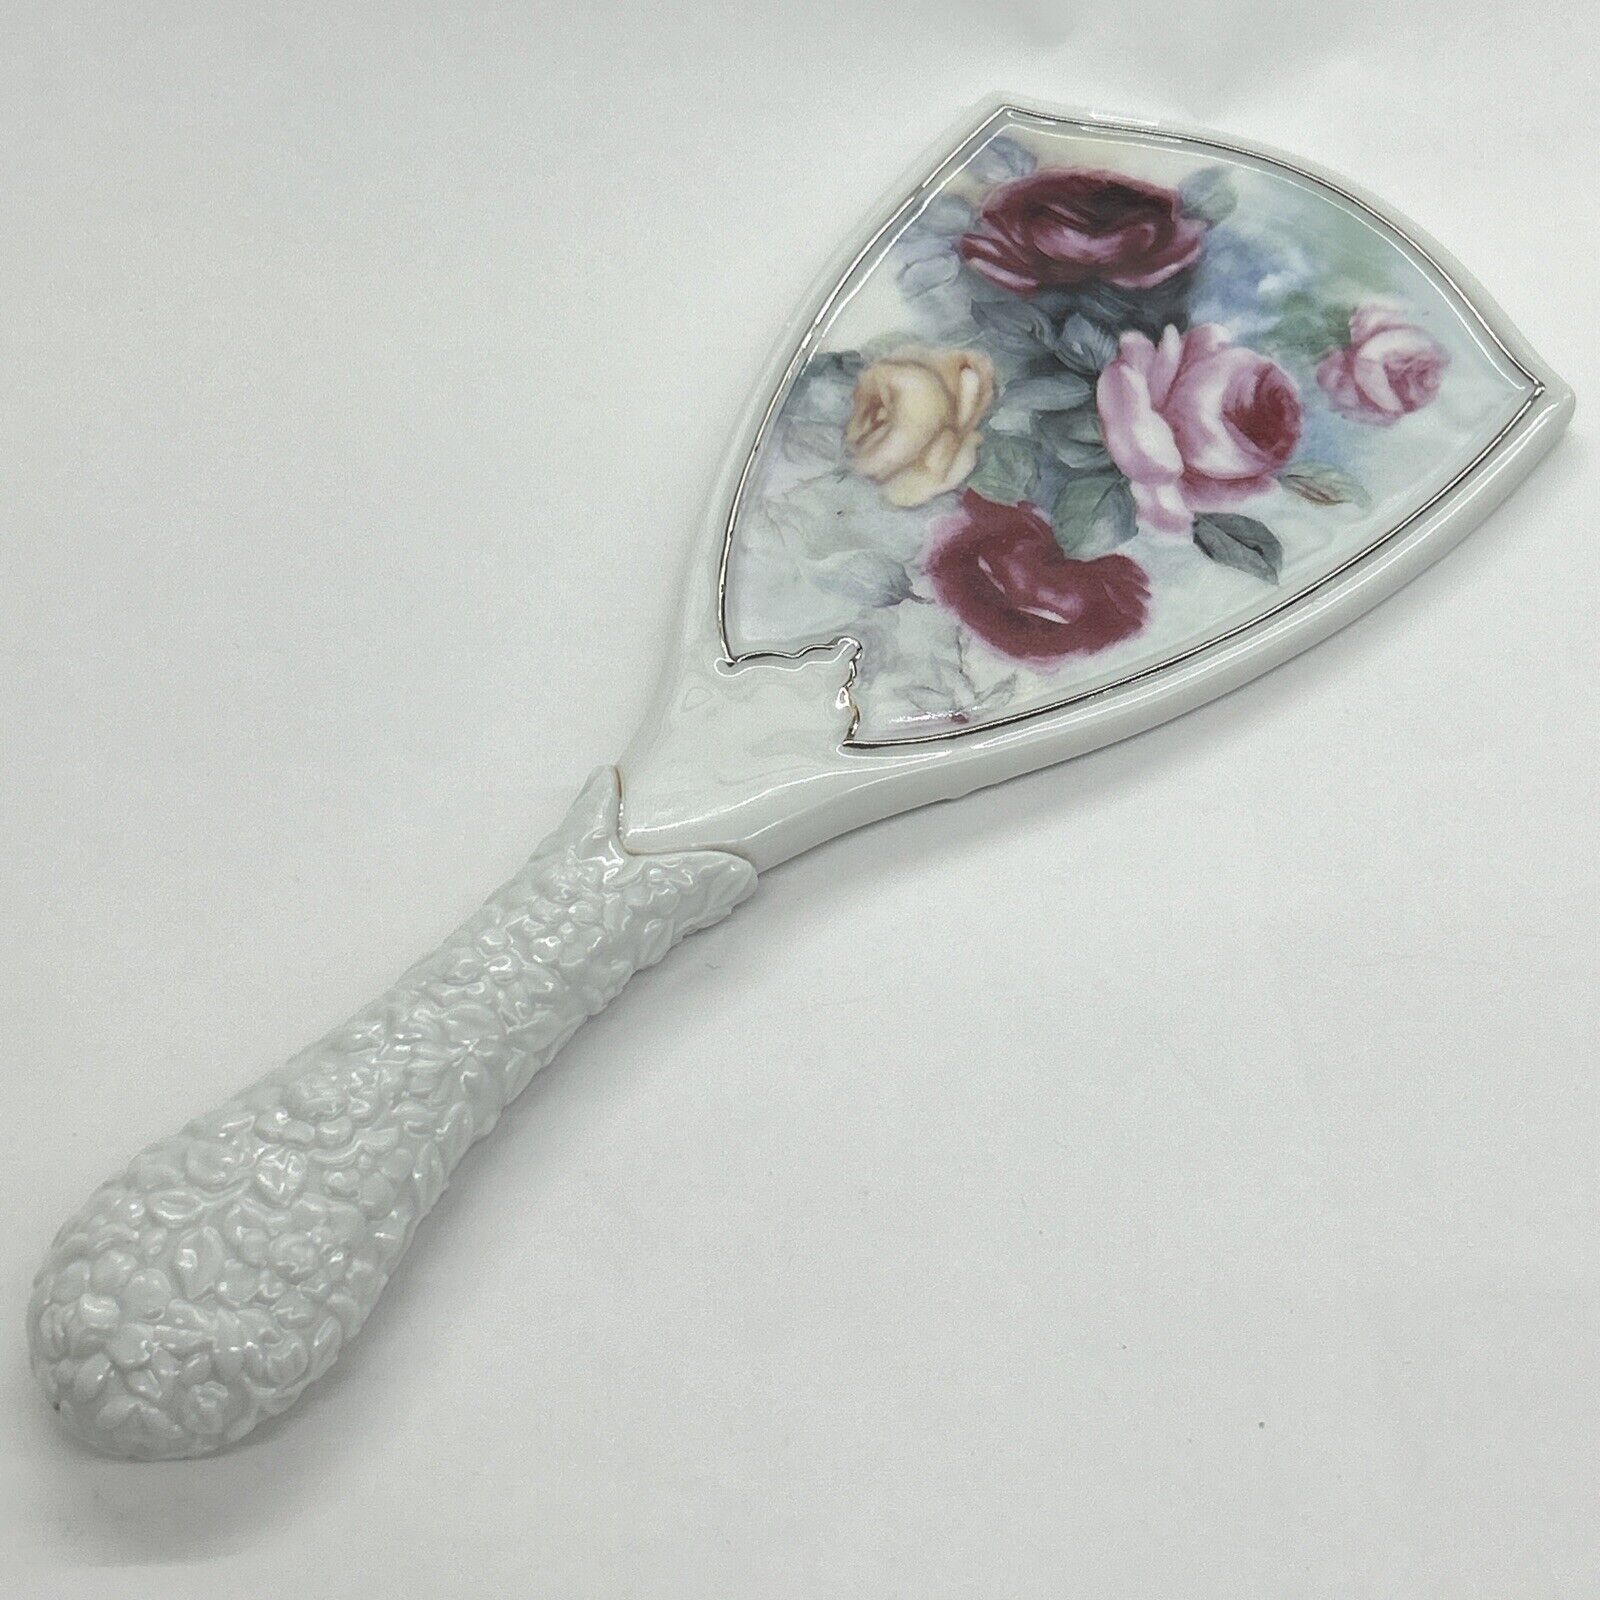 Avon 2006 Rose Collection Vanity Hand Mirror White Porcelain 11-1/2” Long